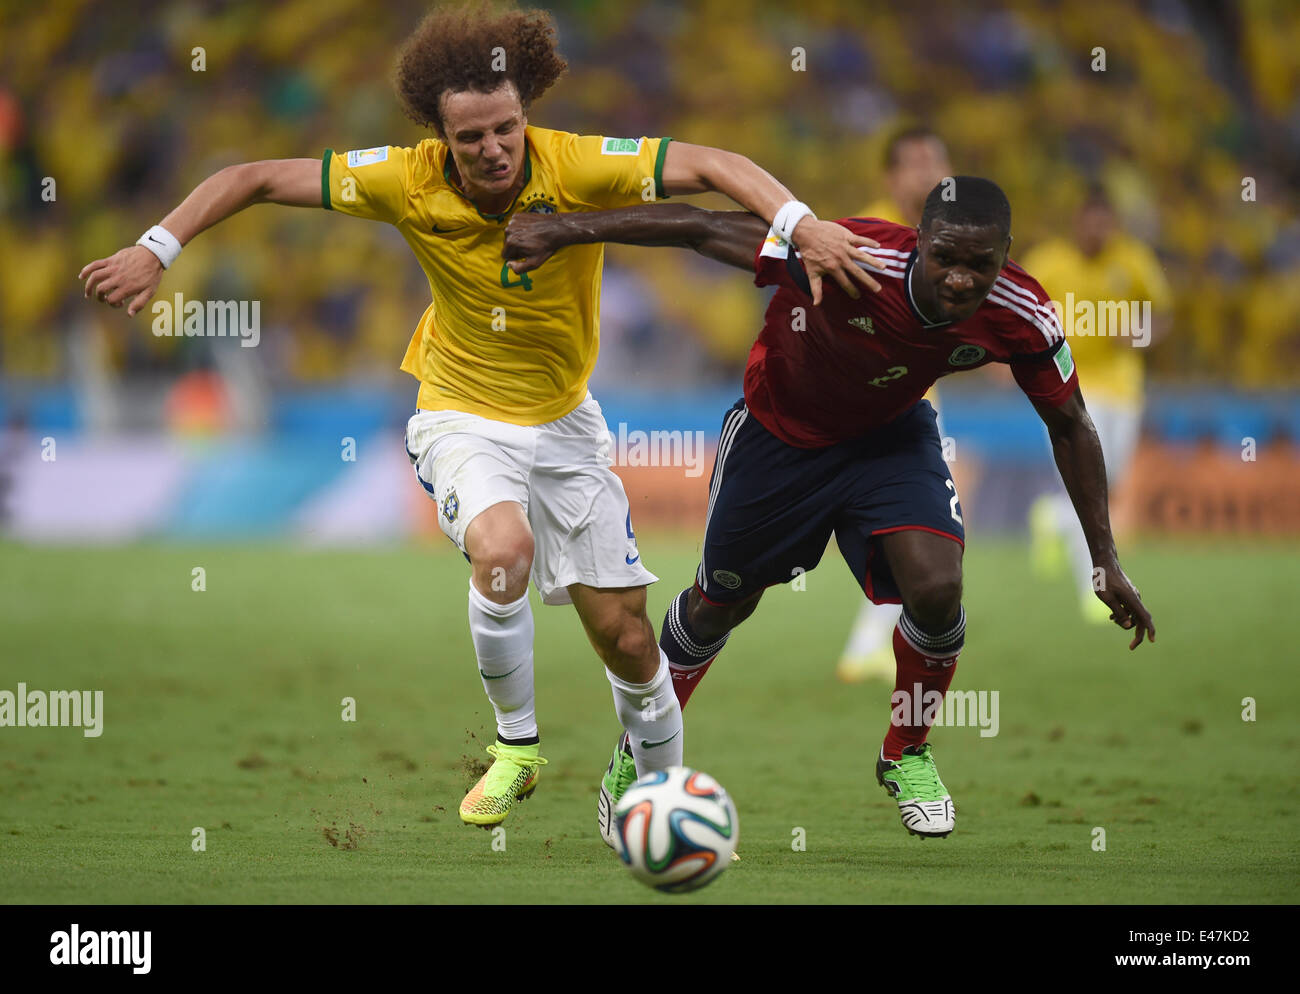 Fortaleza, Brazil. 04th July, 2014. David Luiz (L) of Brazil and Cristian Zapata of Colombia vie for the ball during the FIFA World Cup 2014 quarter final match soccer between Brazil and Colombia at the Estadio Castelao in Fortaleza, Brazil, 04 July 2014. Photo: Marius Becker/dpa/Alamy Live News Stock Photo